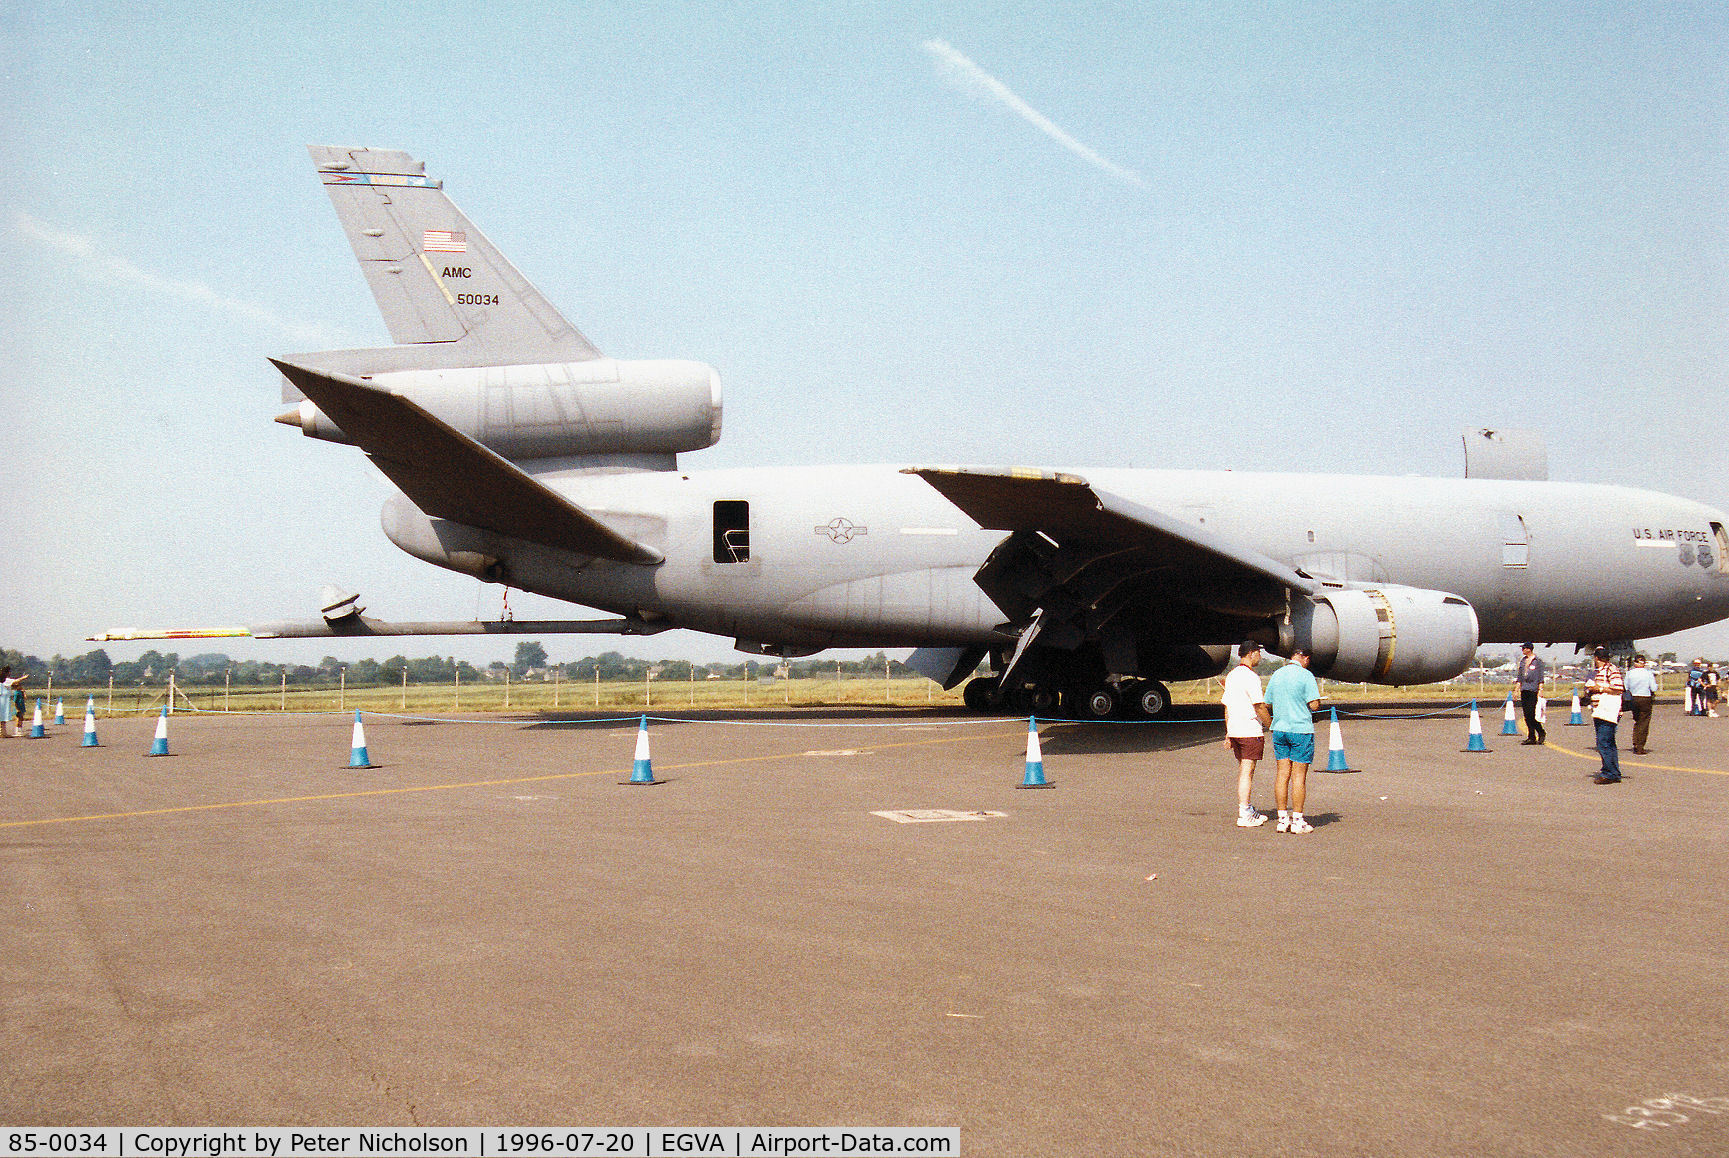 85-0034, 1985 McDonnell Douglas KC-10A Extender C/N 48239, KC-10A Extender of the 305th Air Mobility Wing on display at the 1996 Royal Intnl Air Tattoo at RAF Fairford.